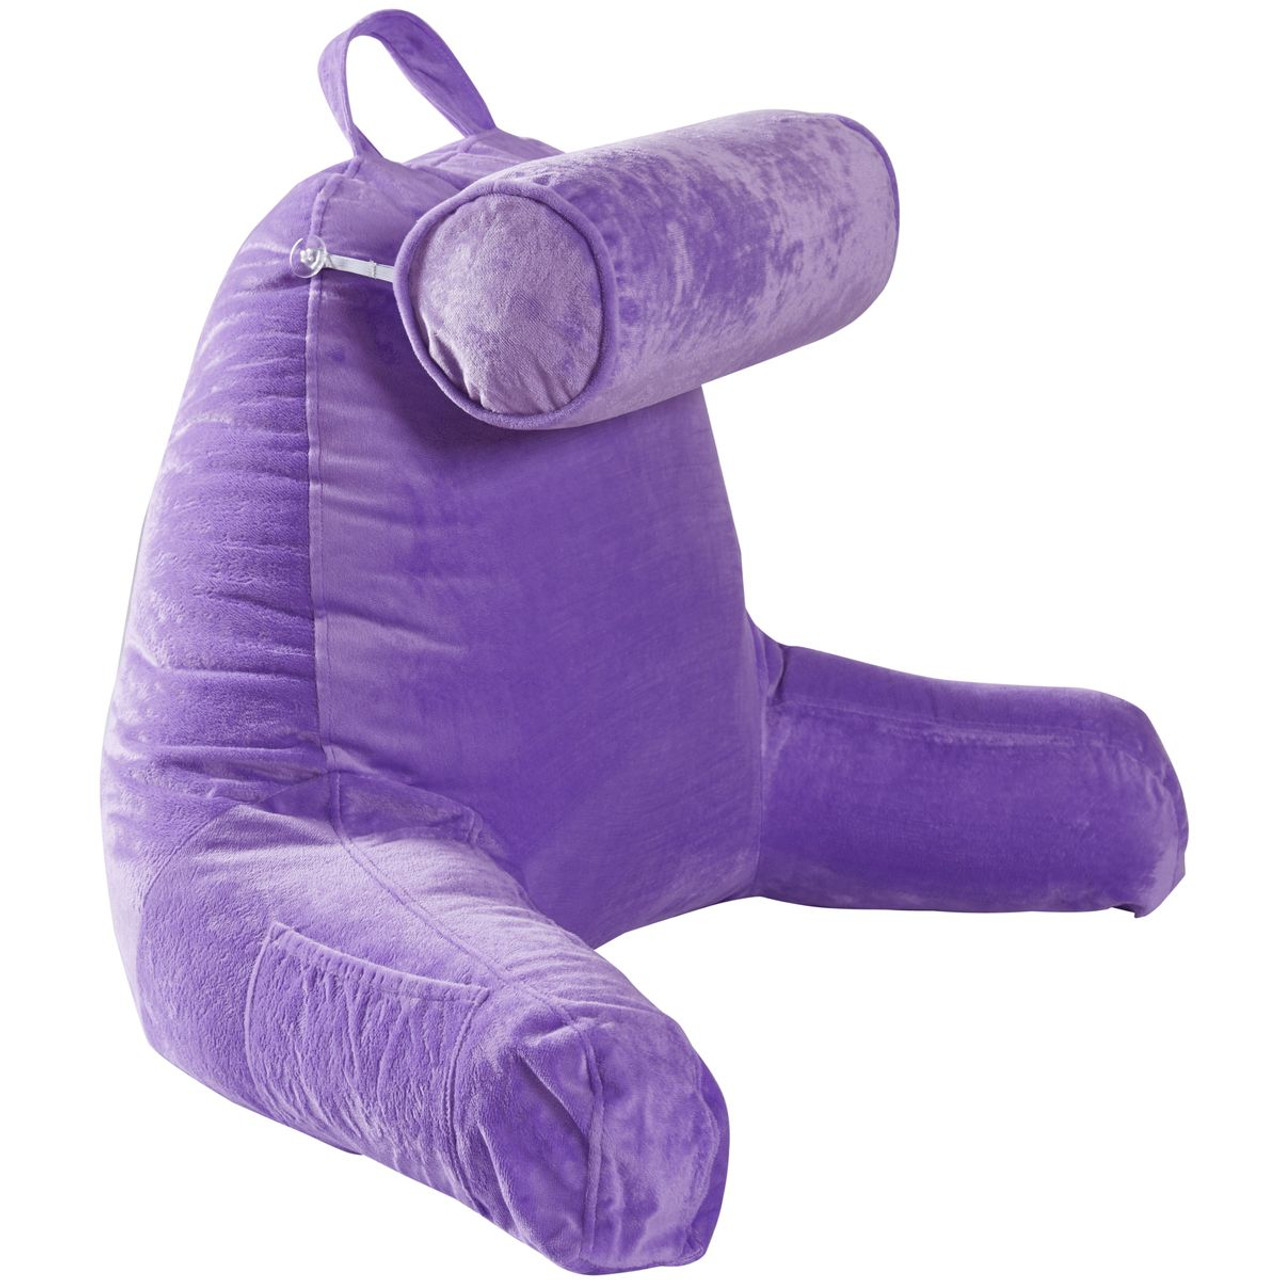 Cheer Collection® XL Hollow Fiber Pillow with Bolster & Backrest product image